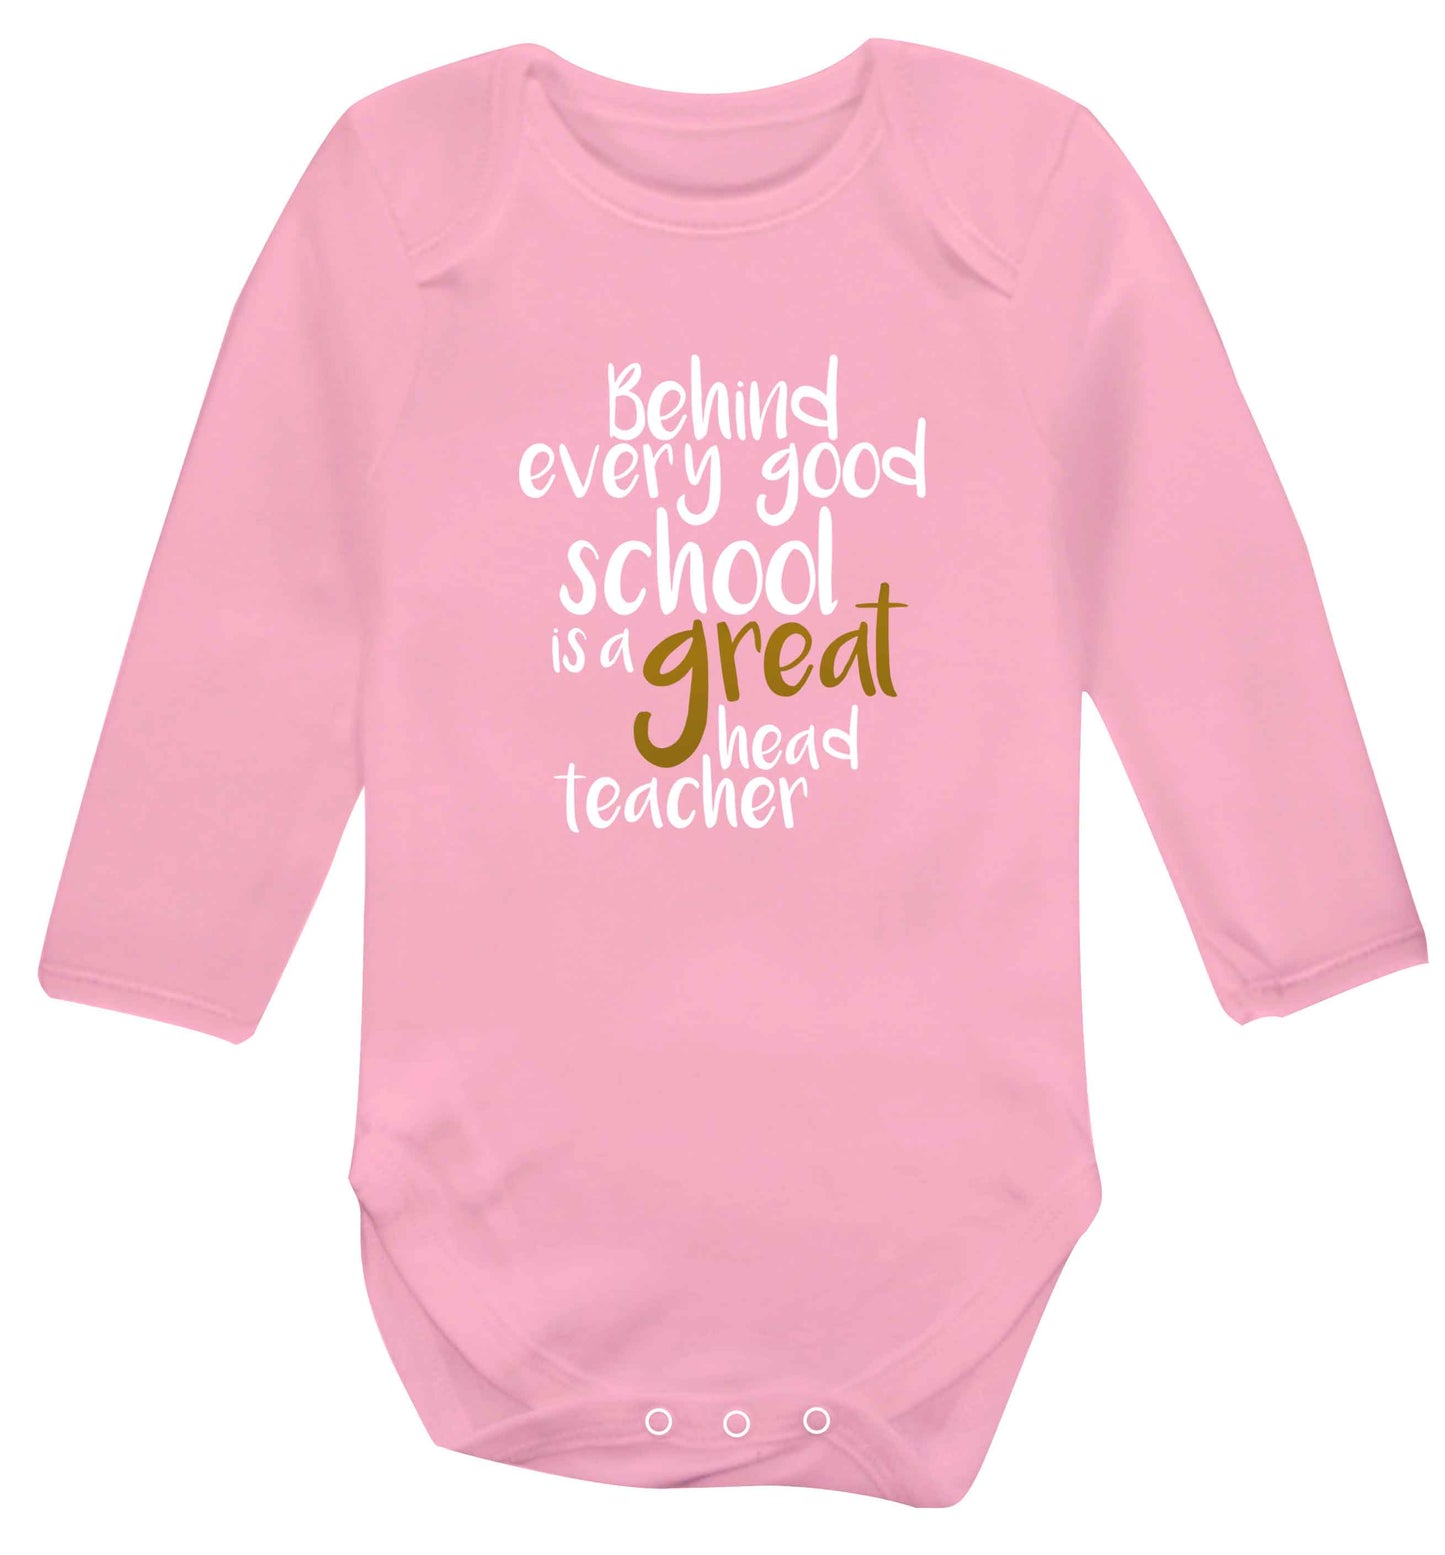 Behind every good school is a great head teacher baby vest long sleeved pale pink 6-12 months